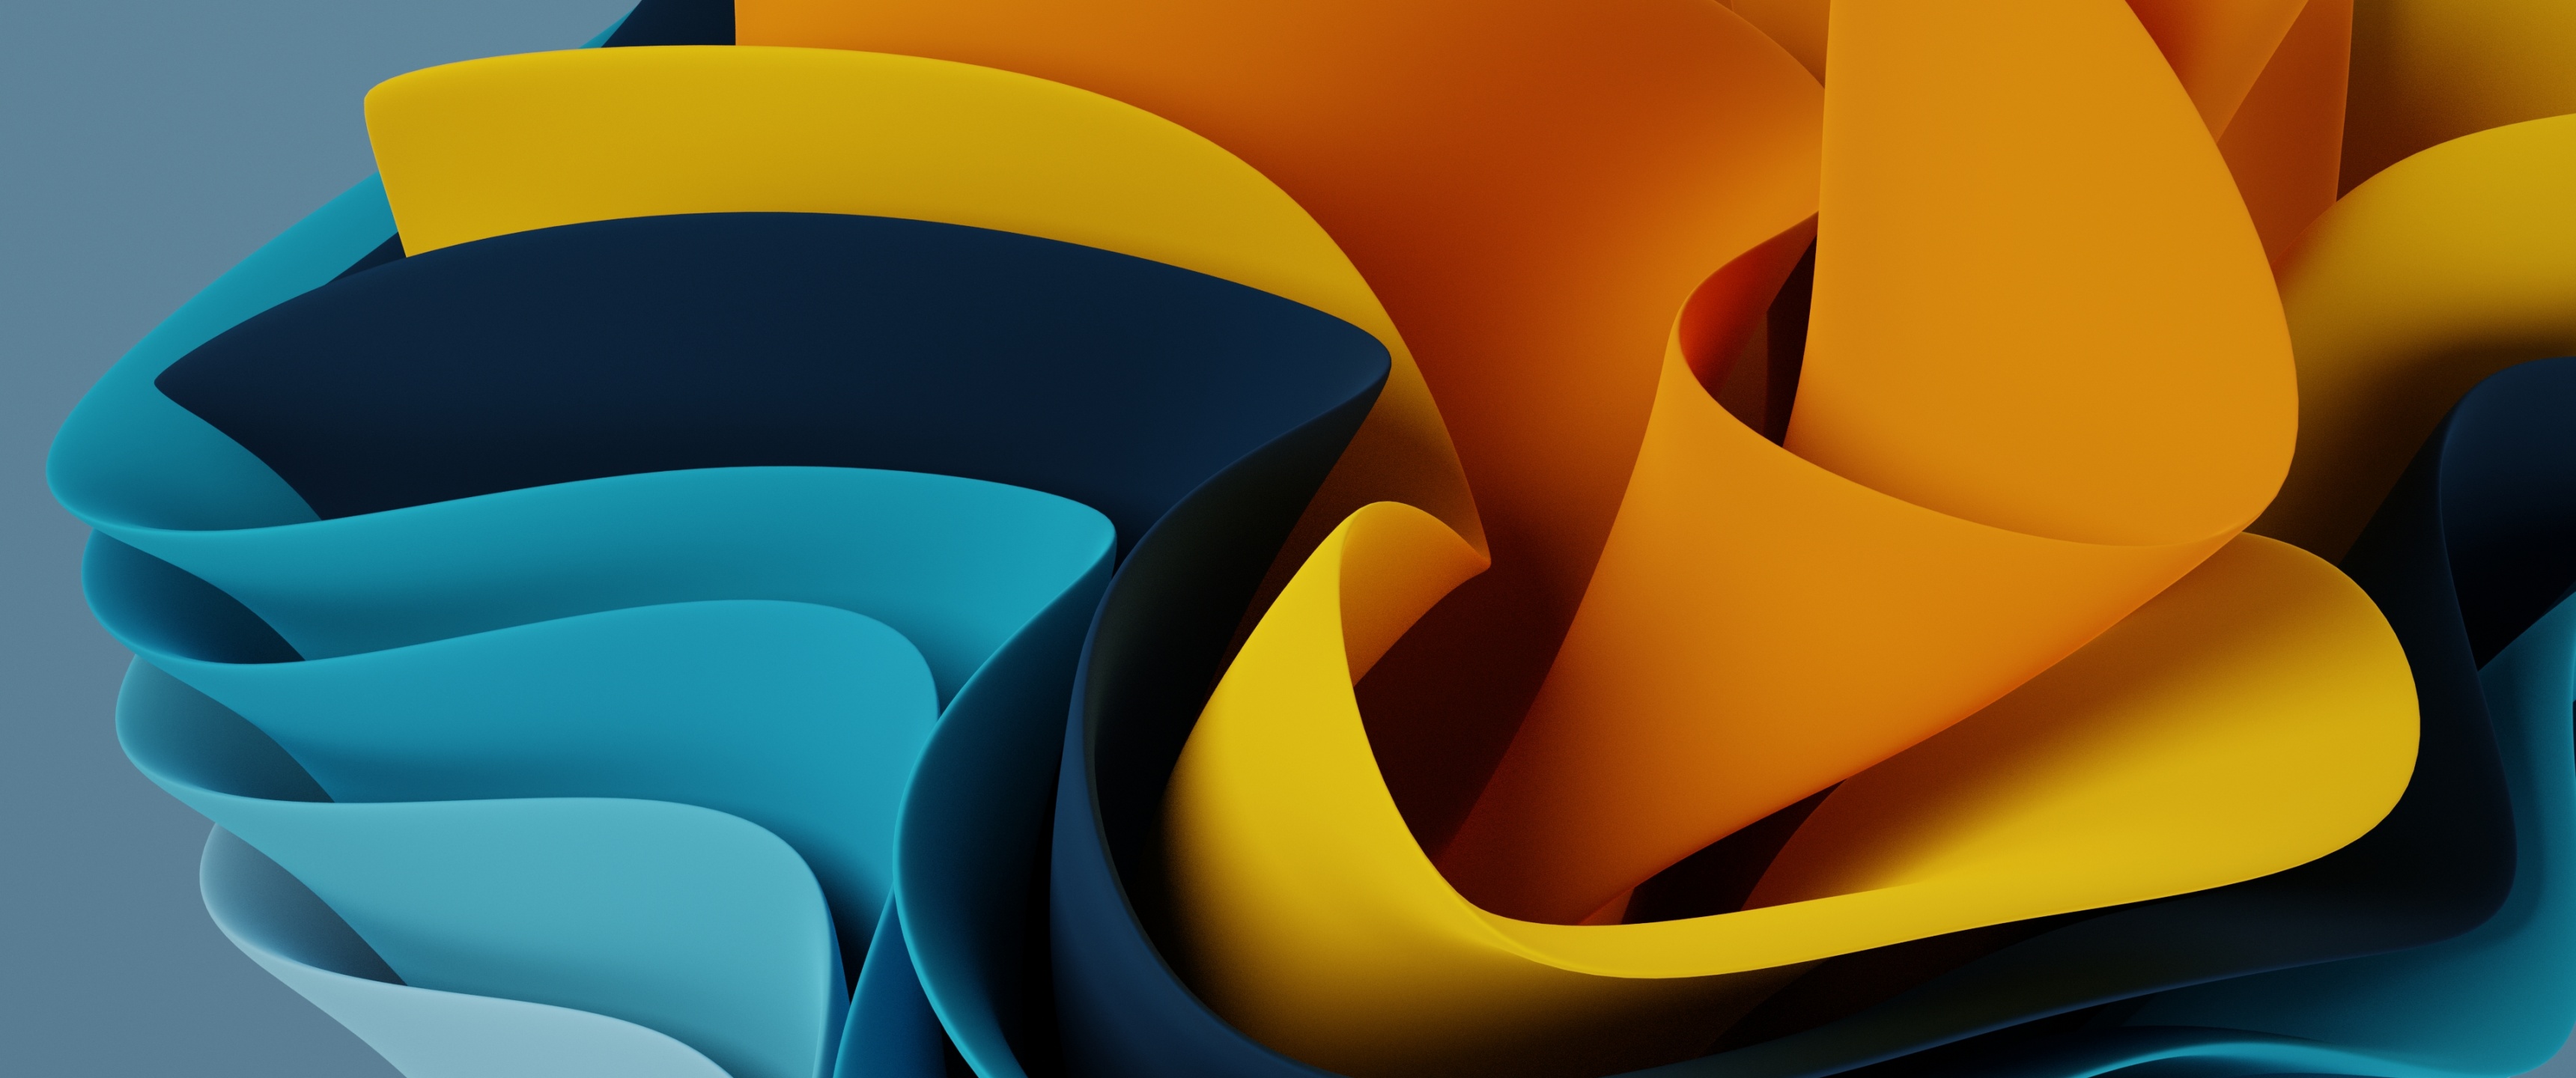 Abstract background Wallpaper 4K, 3D Render, Abstract, #9741